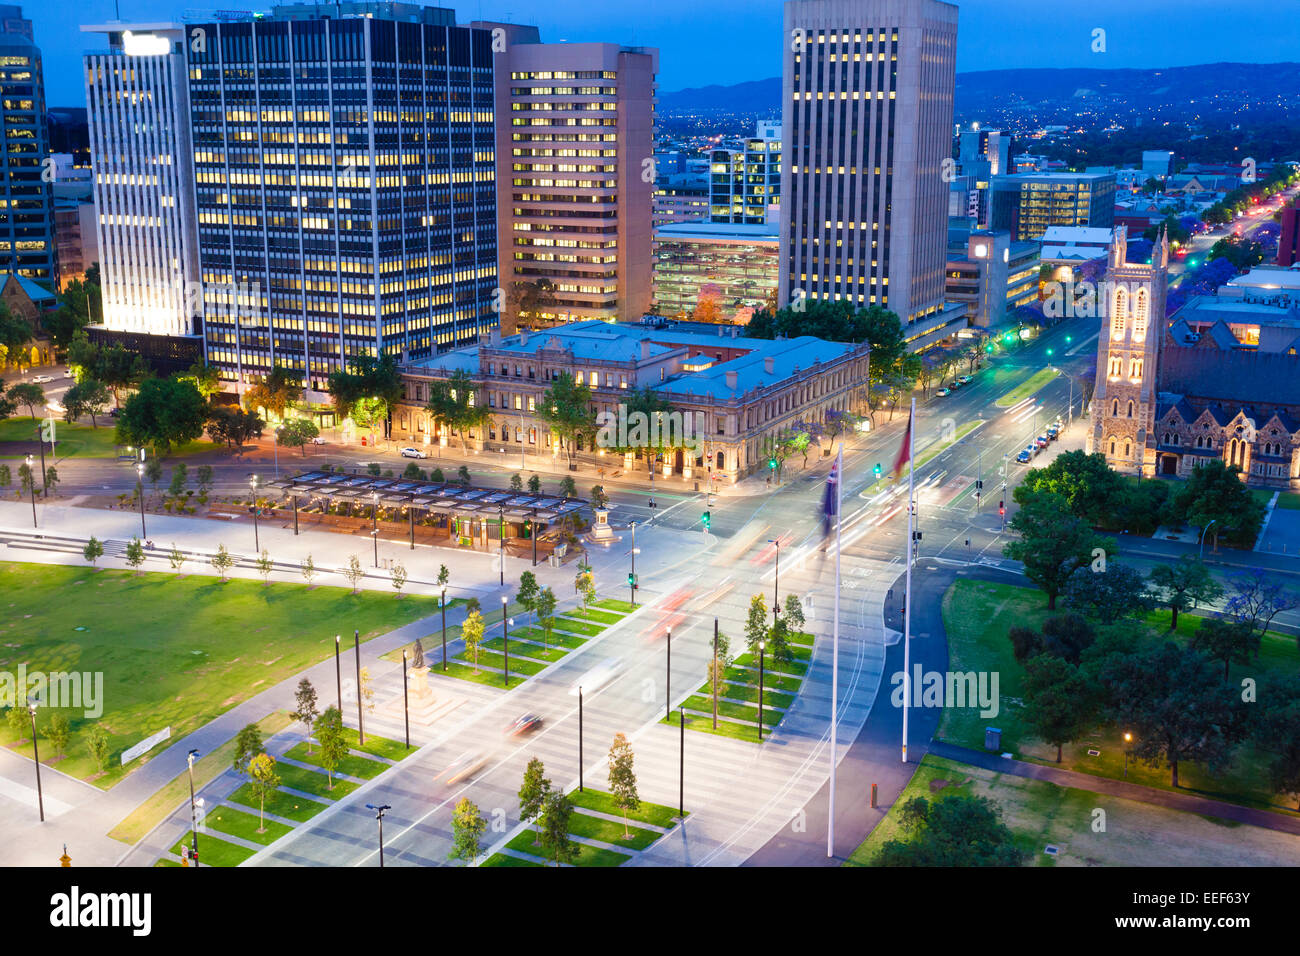 View of downtown area in Adelaide at twilight Stock Photo